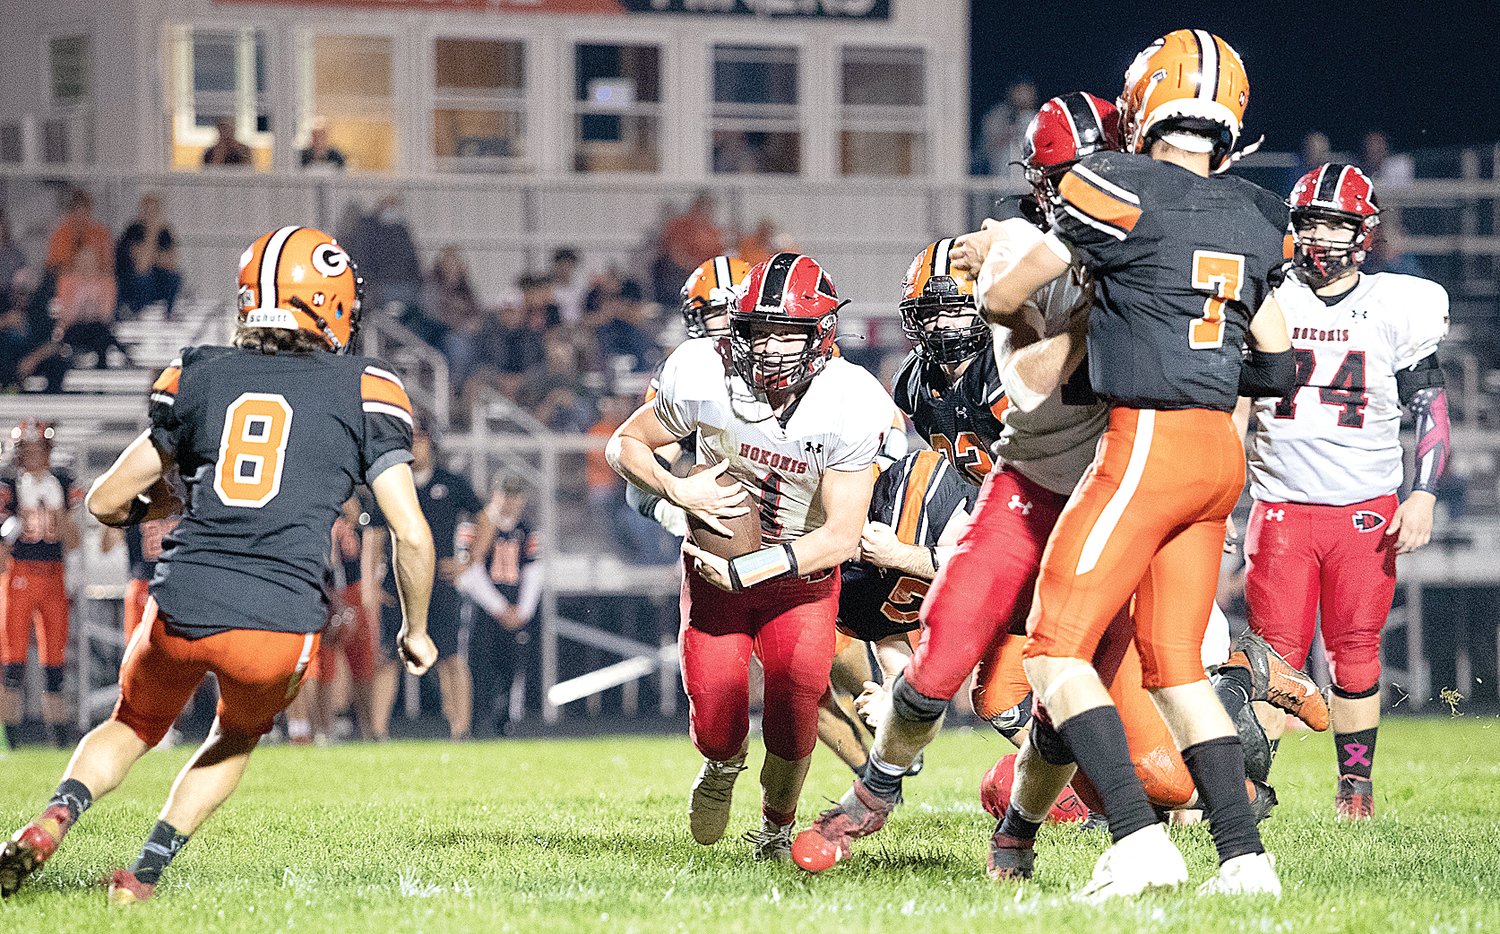 The Nokomis offensive line provided plenty of room for the Redskin backs to run, including quarterback Connor Overby, who had 47 of Nokomis 382 rushing yards in Nokomis' 35-12 win in Gillespie on Oct. 8.